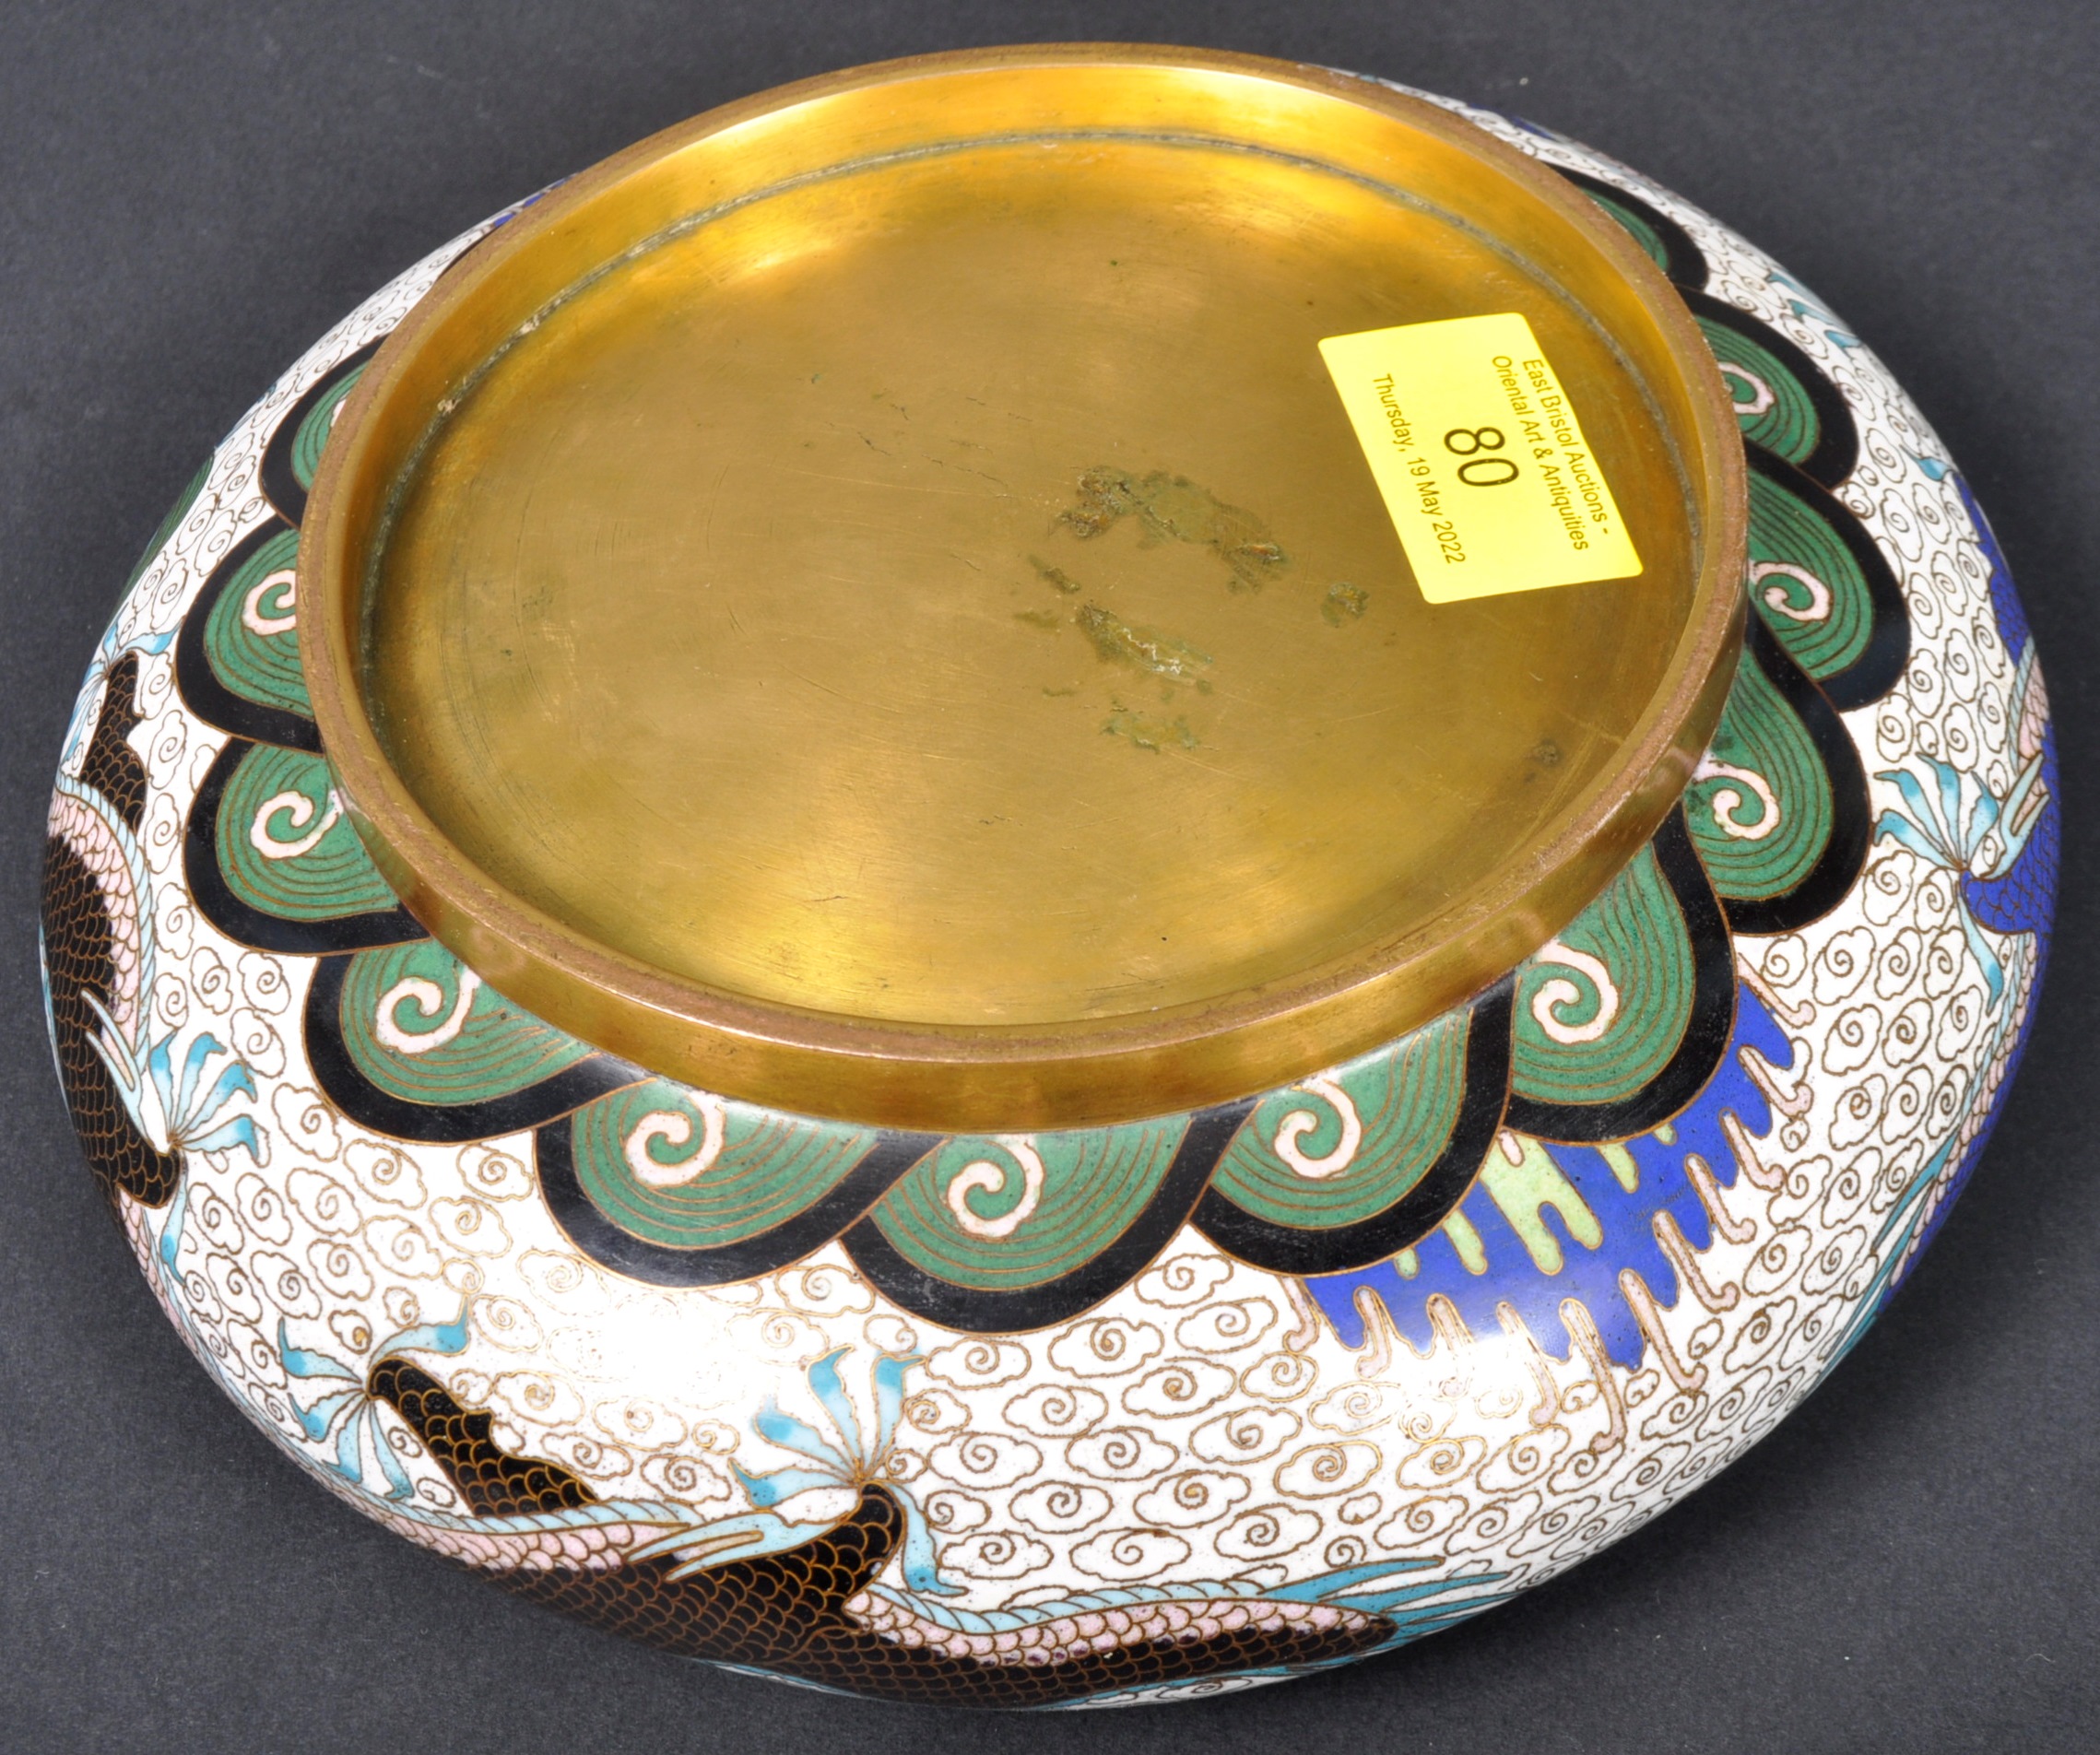 EARLY 20TH CENTURY CHINESE QING DYNASTY CLOISONNÉ BRONZE BOWL - Image 9 of 9